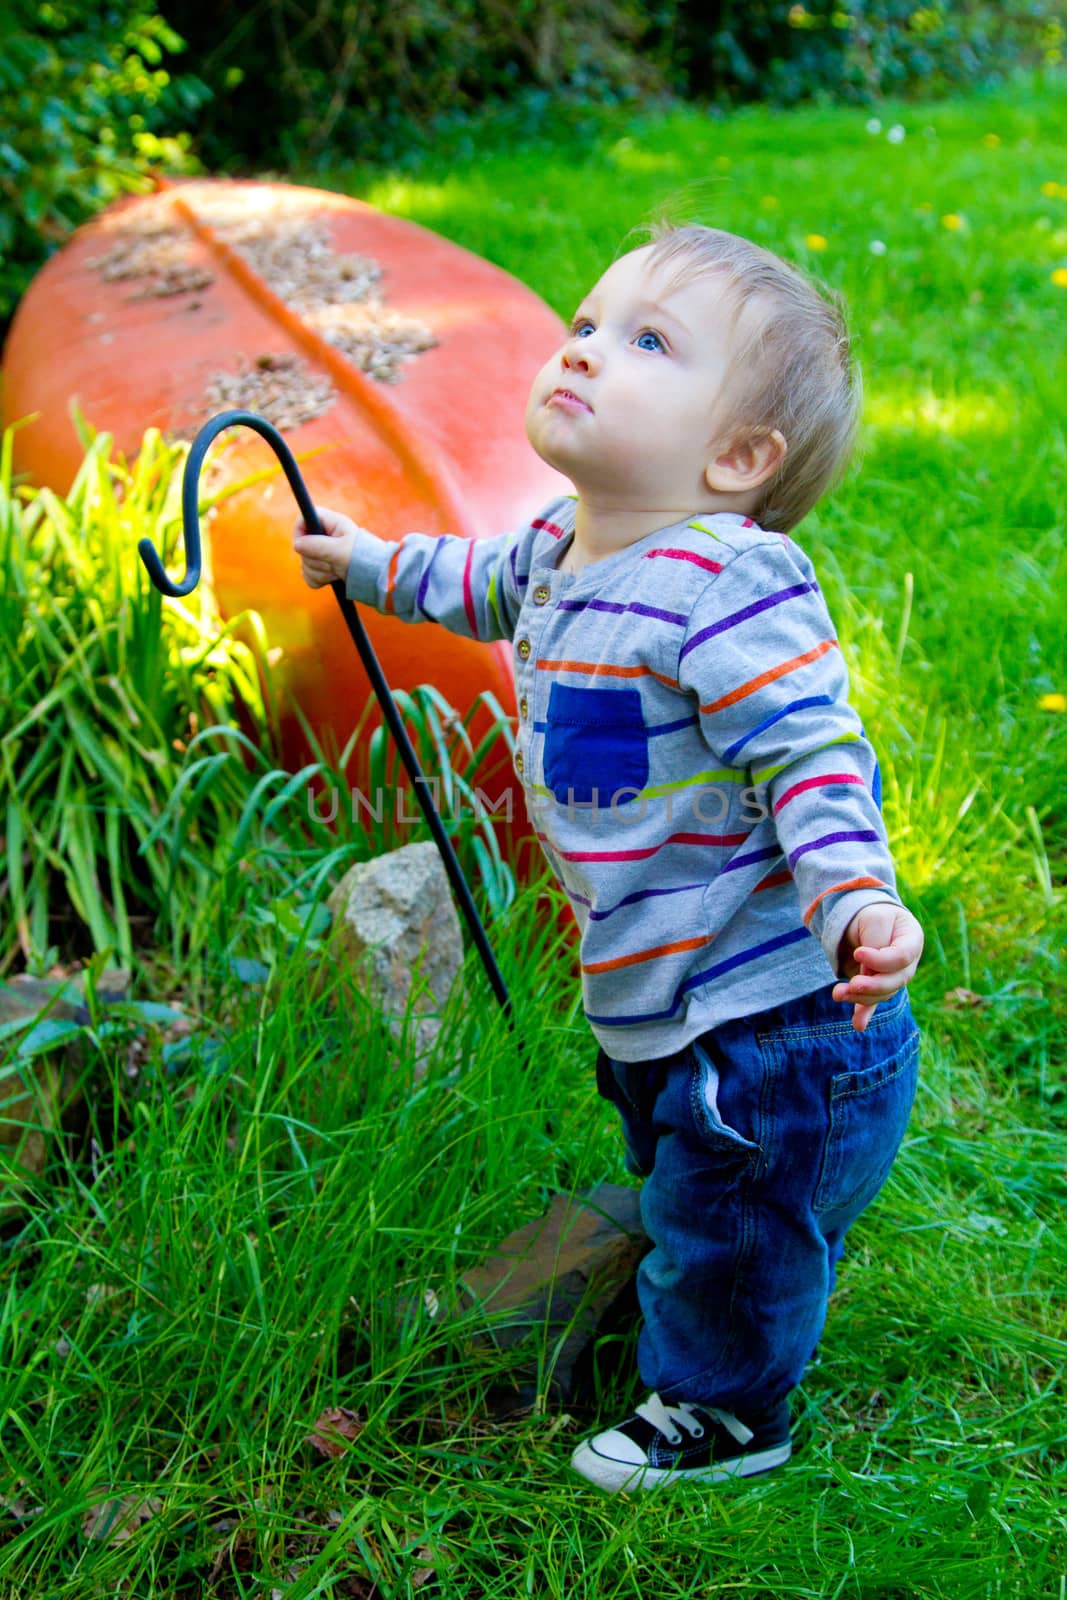 A very curious one year old toddler boy explores his backyard and plays with interesting things among the grass and plants.